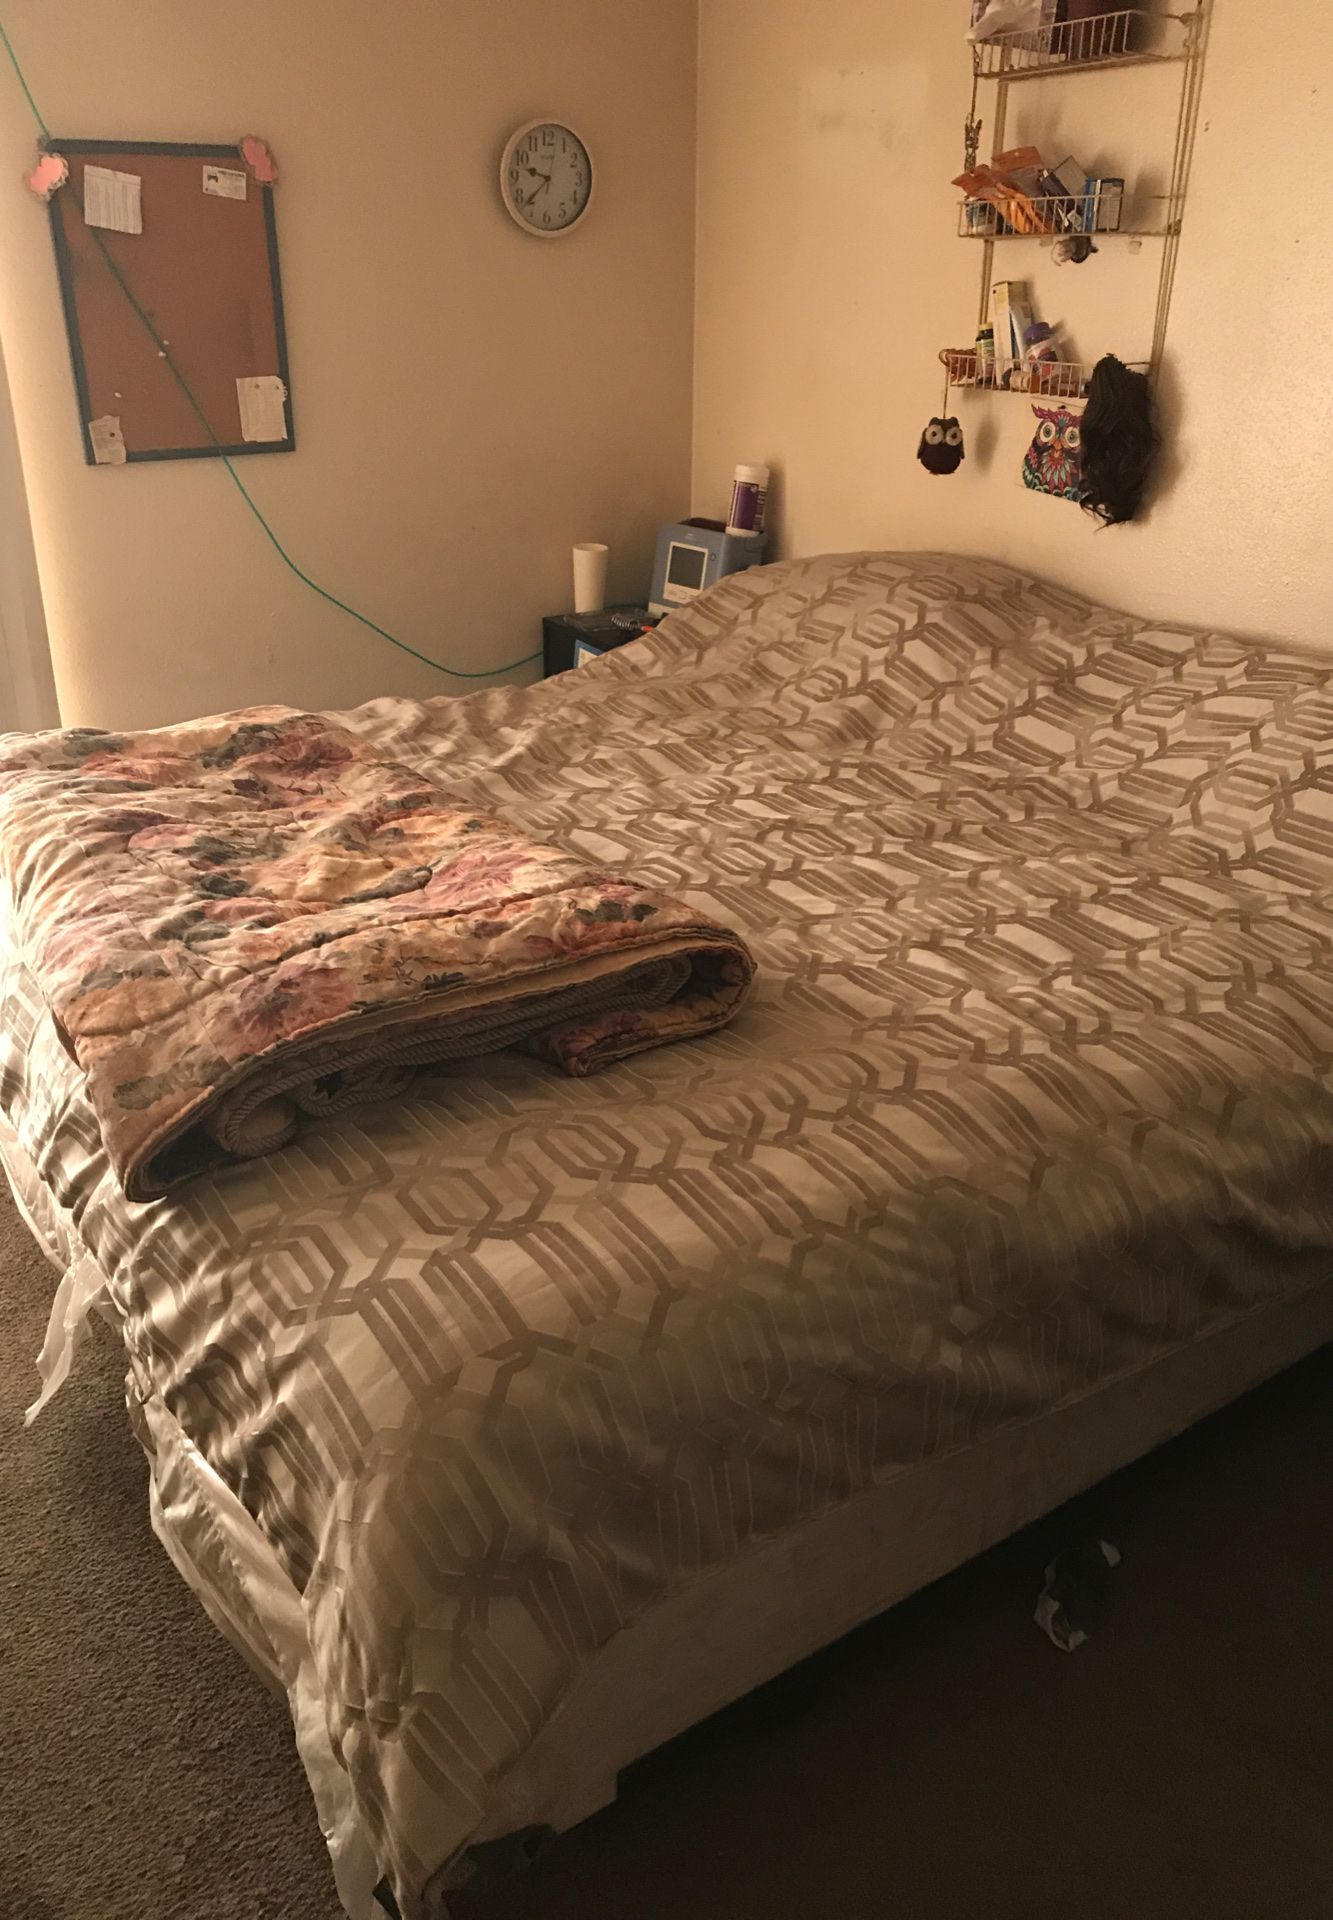 King size bed . Almost new . Will deliver at right price .